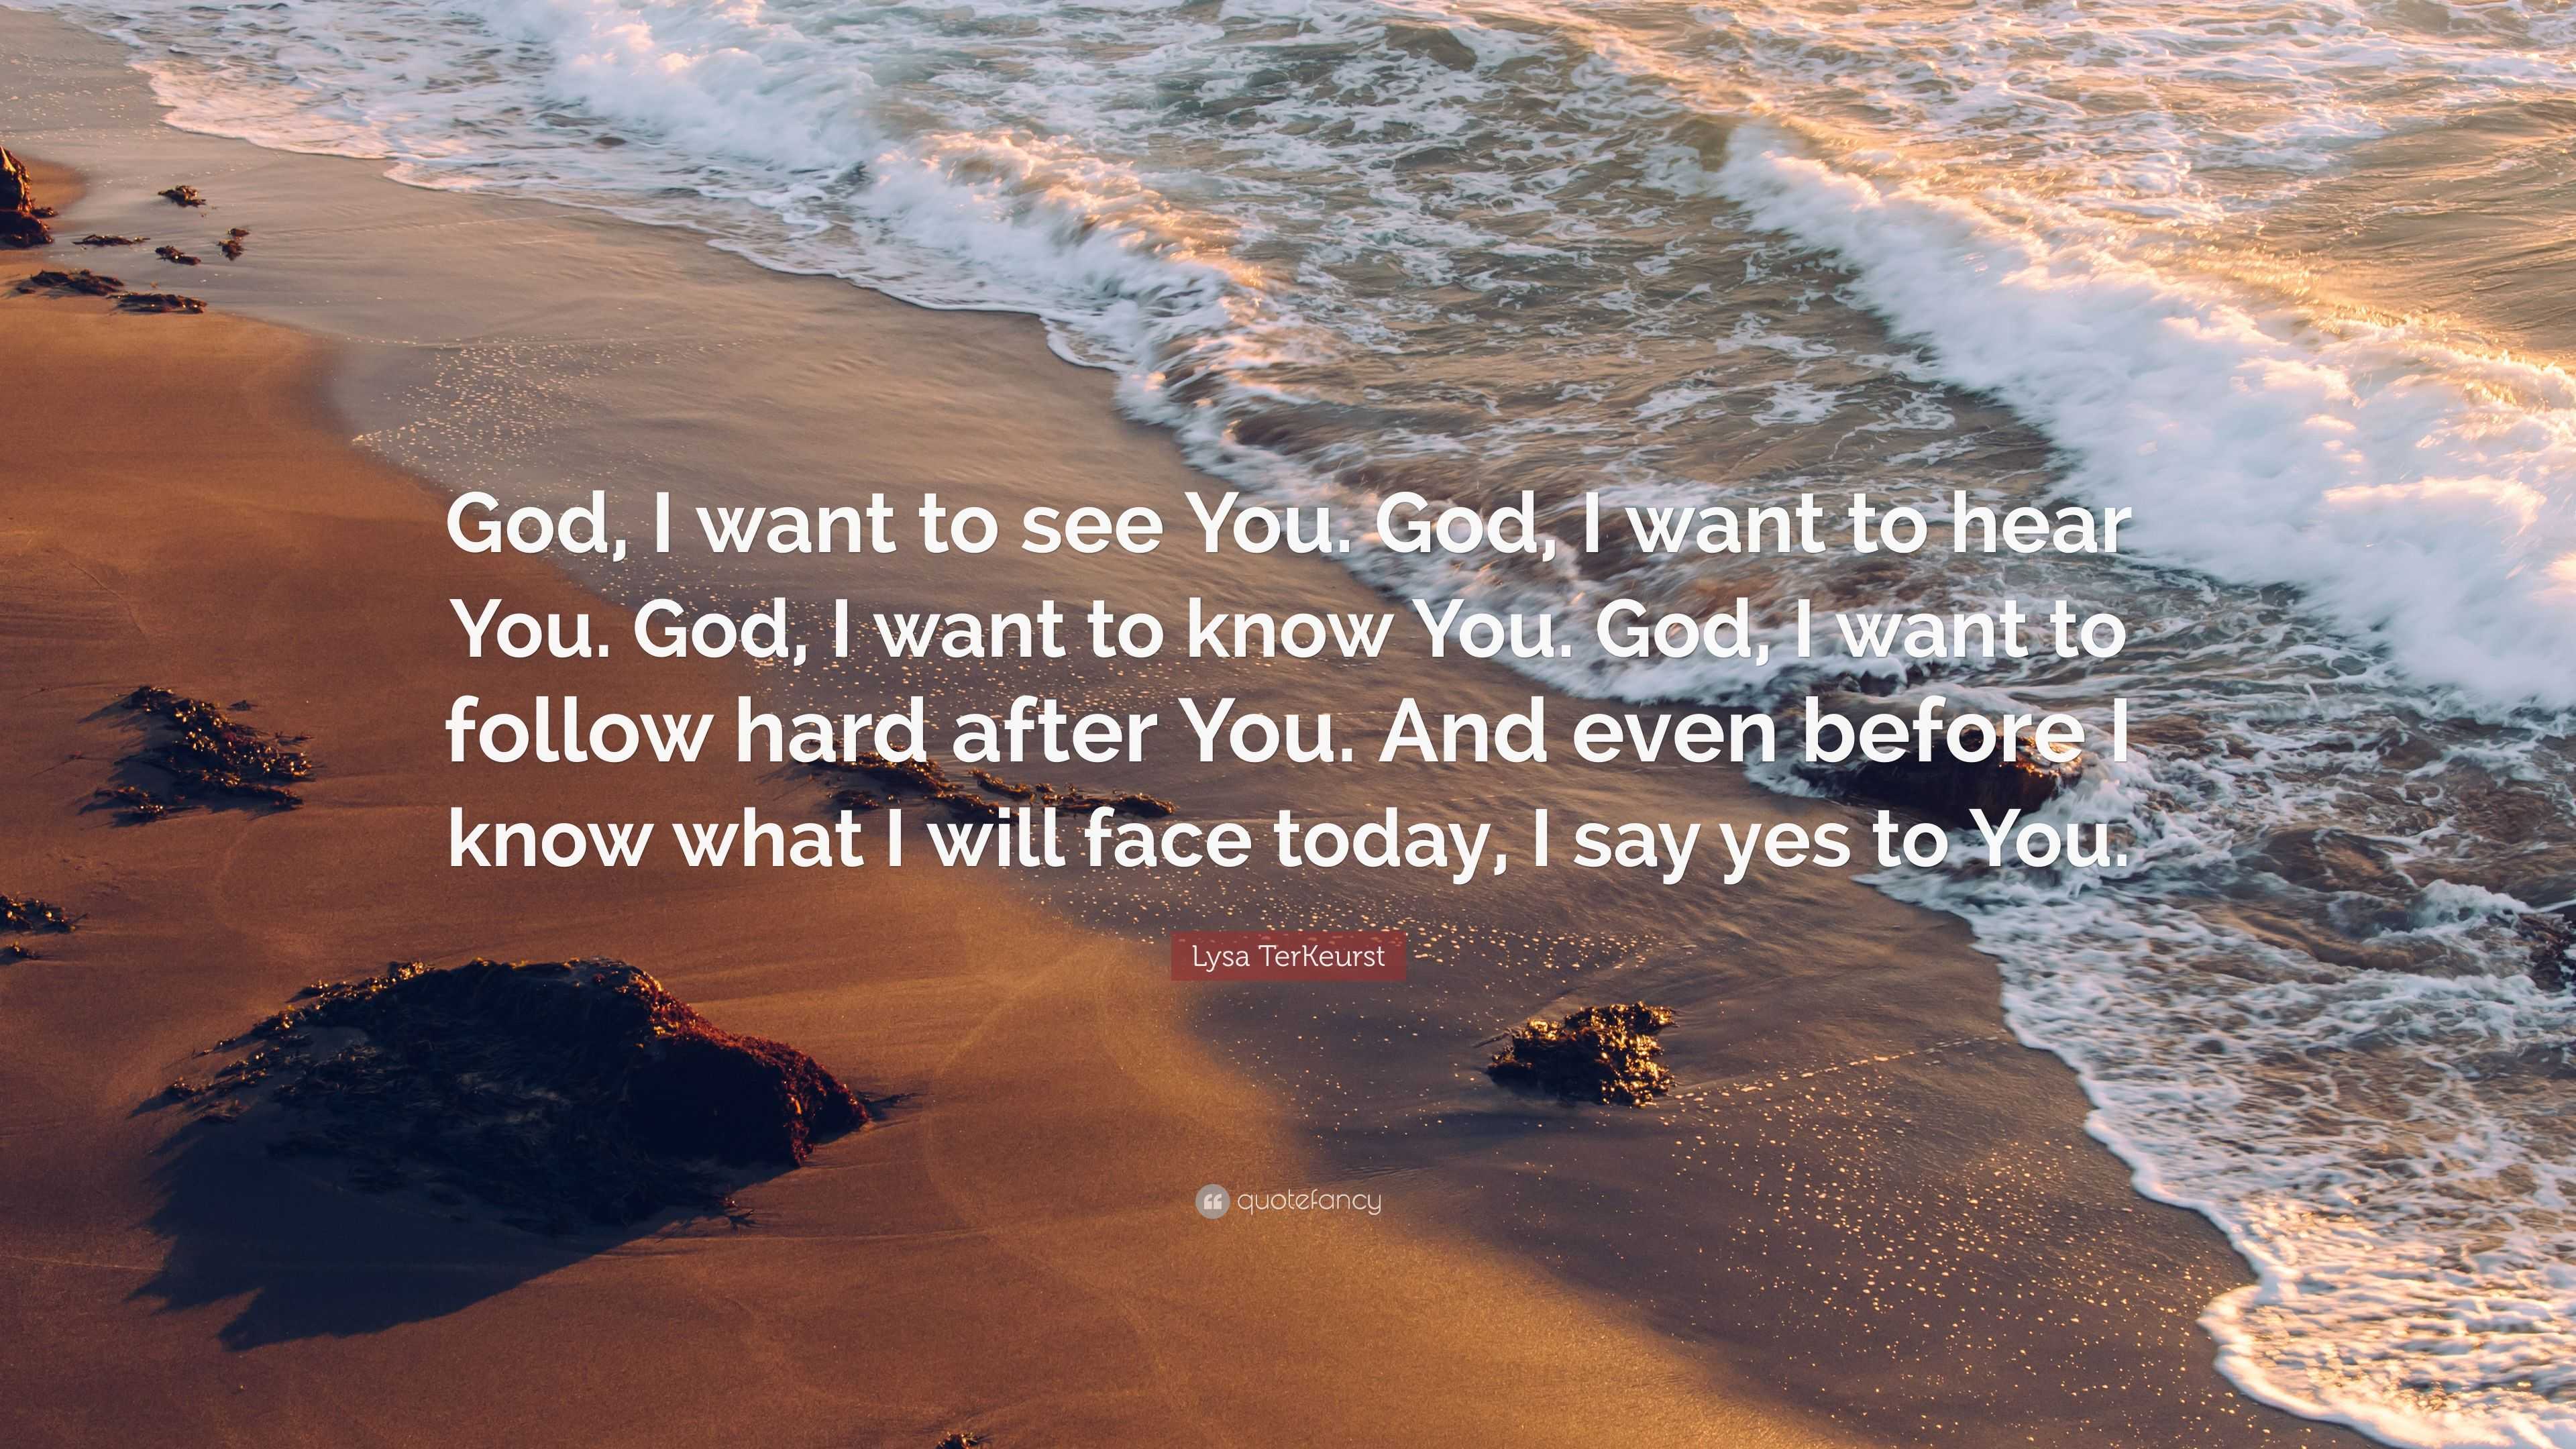 Lysa TerKeurst Quote: “God, I want to see You. God, I want to hear You ...